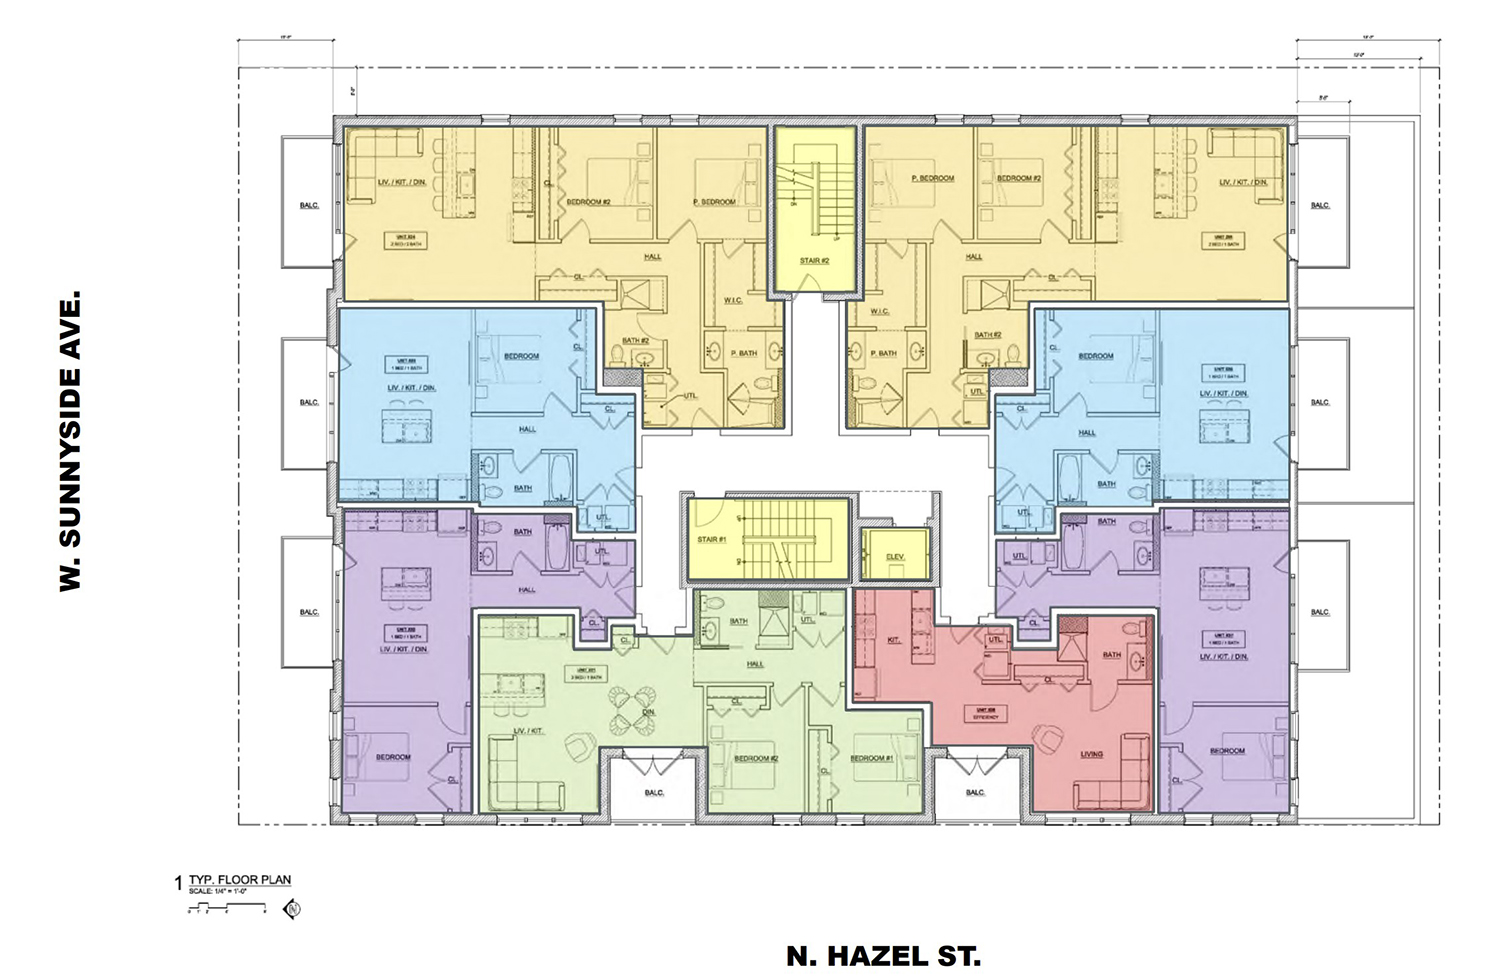 Typical Floor Plan for 4447 N Hazel Street. Drawing by SPACE Architects + Planners